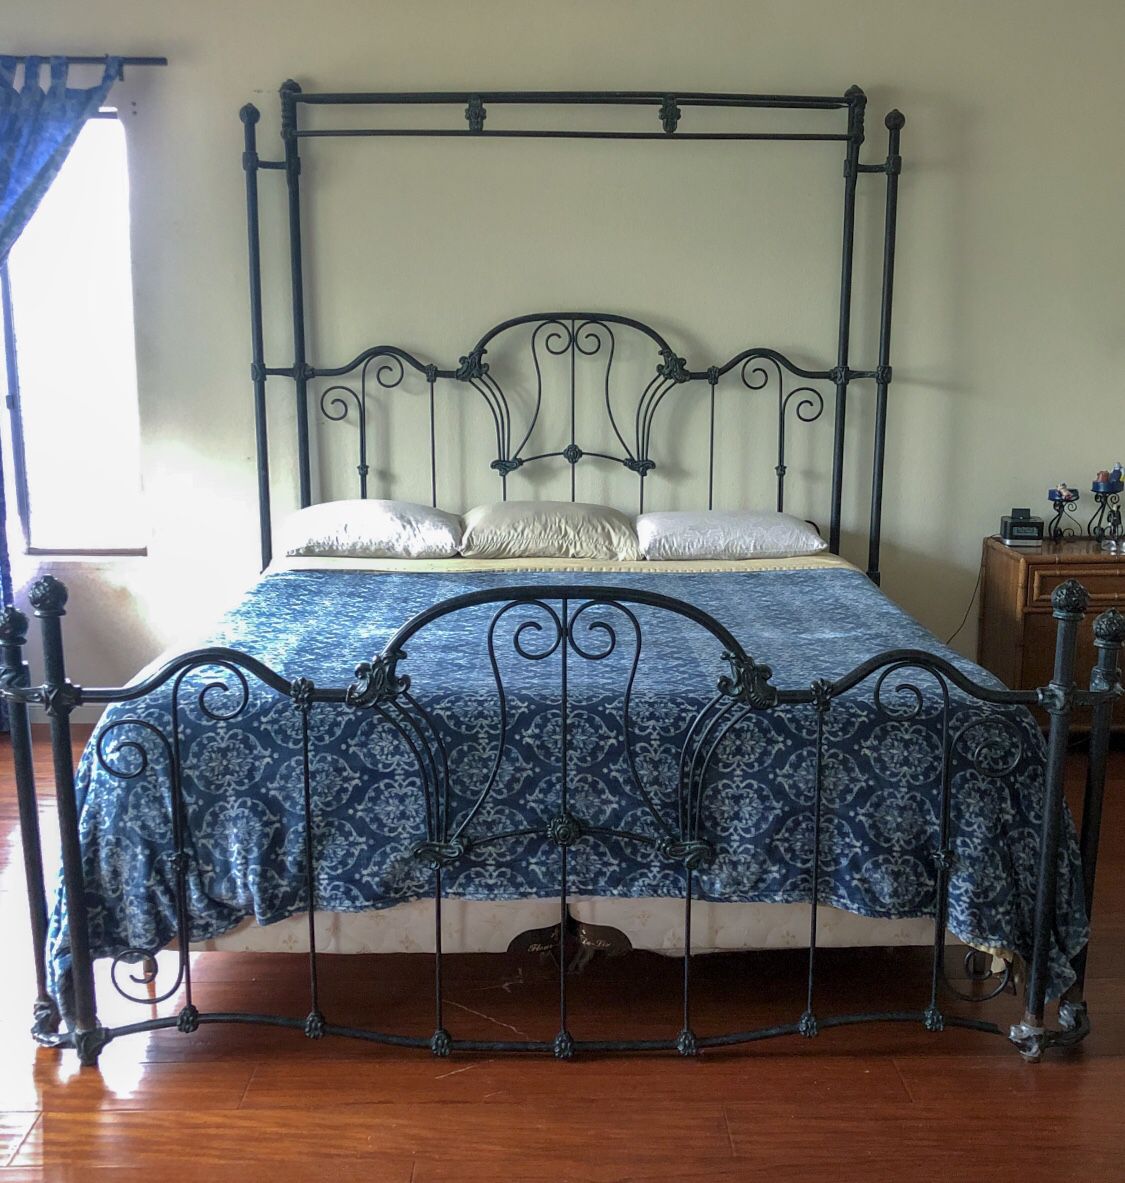 Wrought Iron Poster Bonnet Canopy Bed, Wrought Iron California King Bed